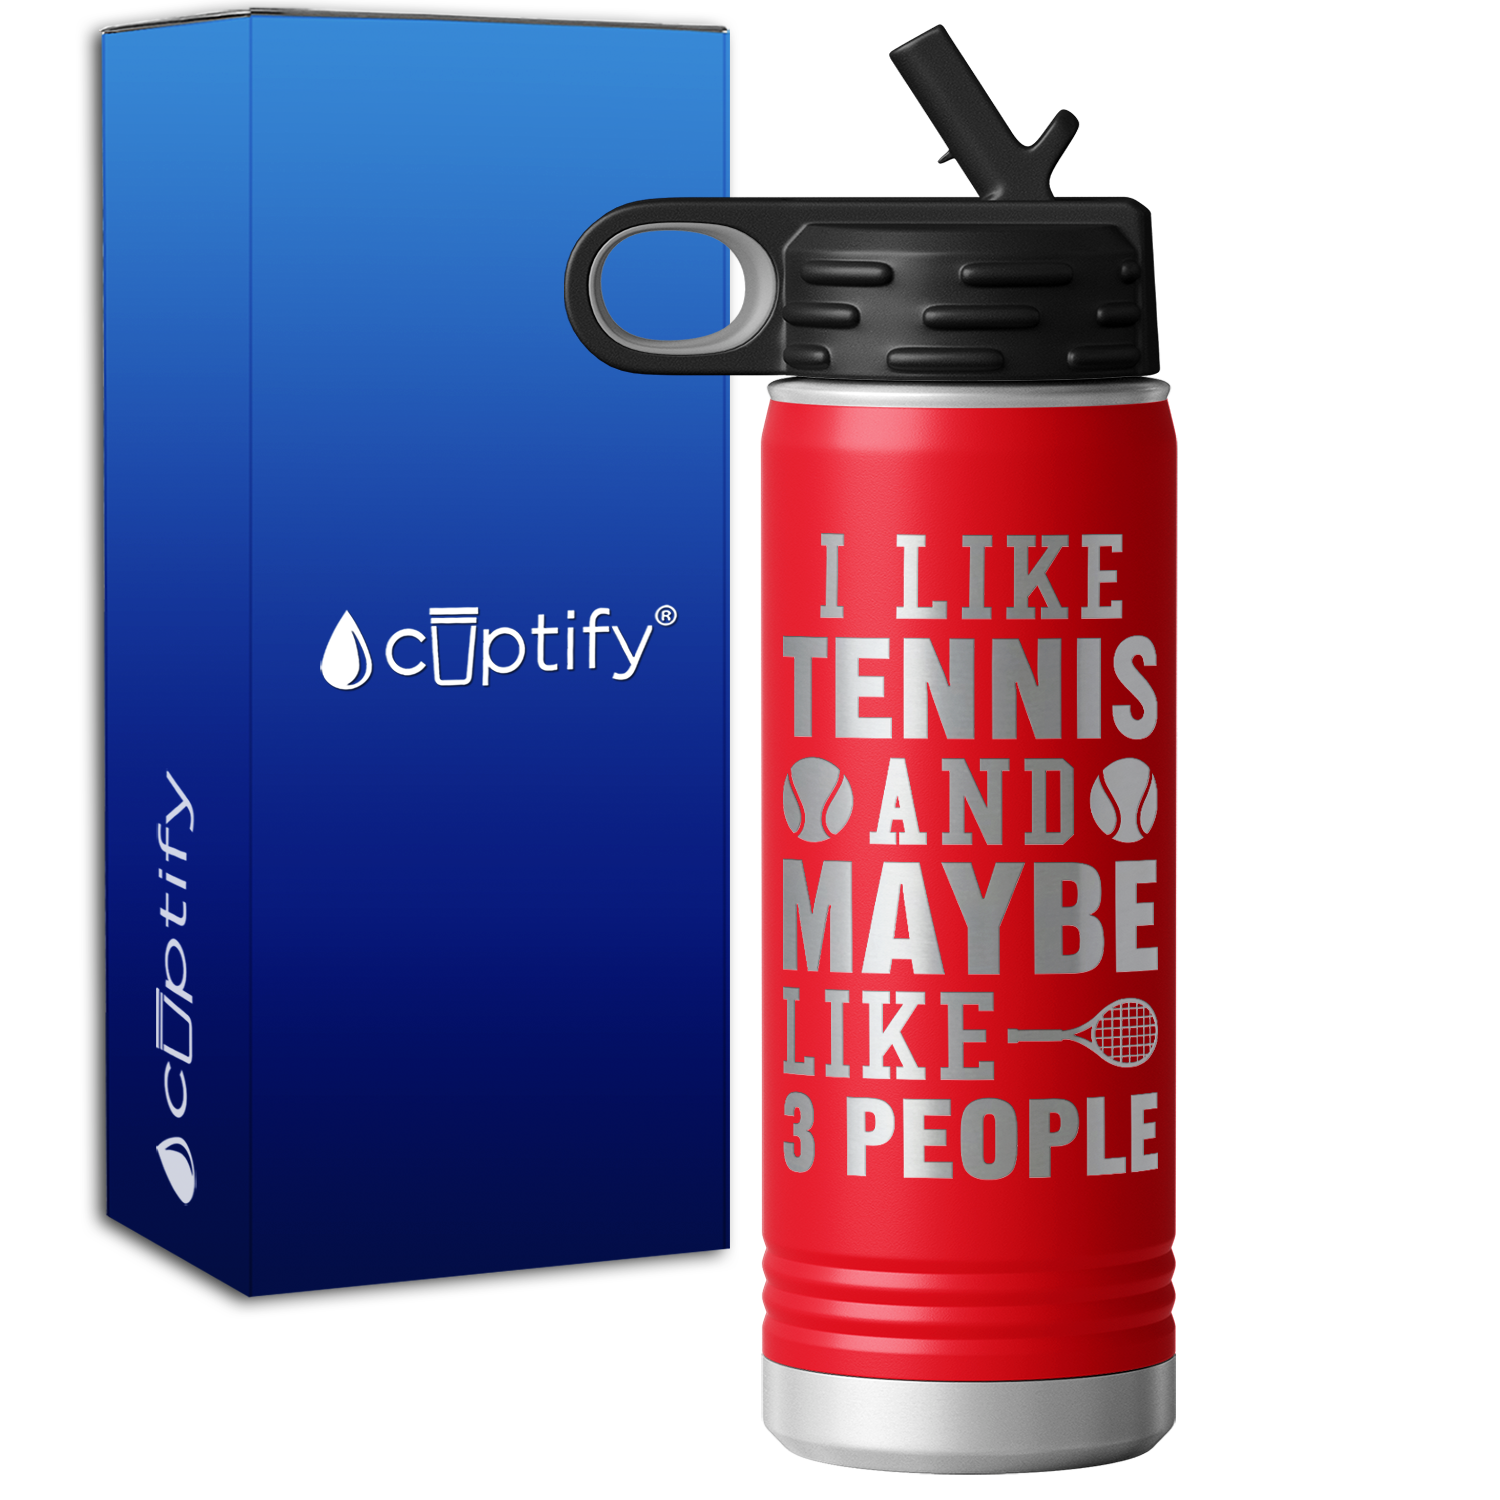 I like Tennis and Maybe LIke 3 People 20oz Sport Water Bottle